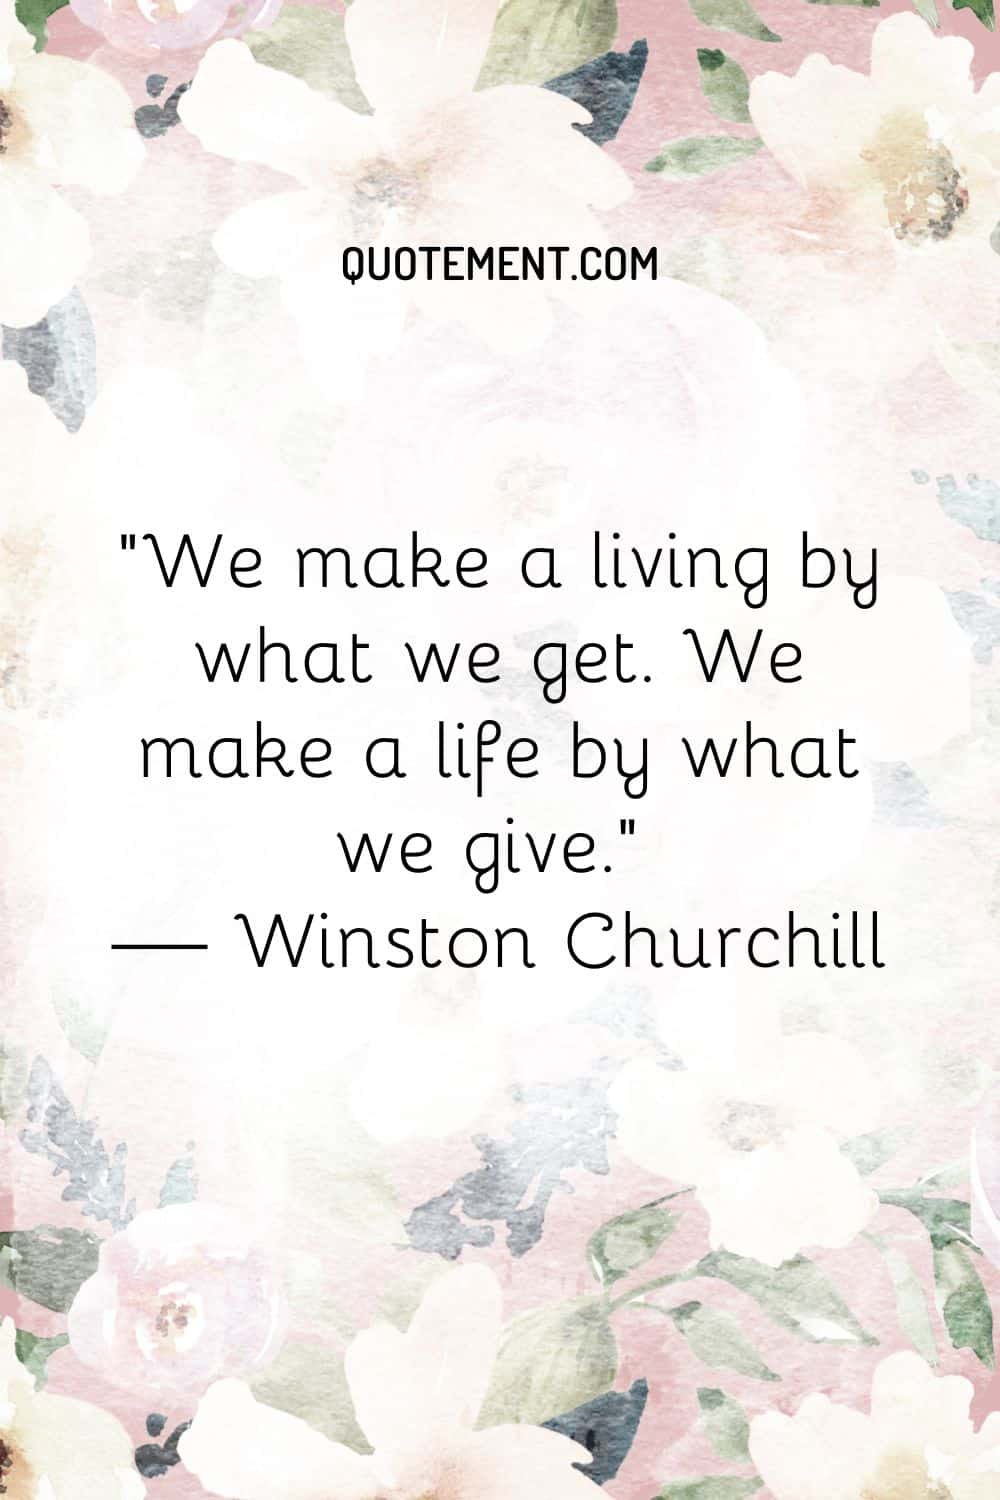 We make a living by what we get. We make a life by what we give